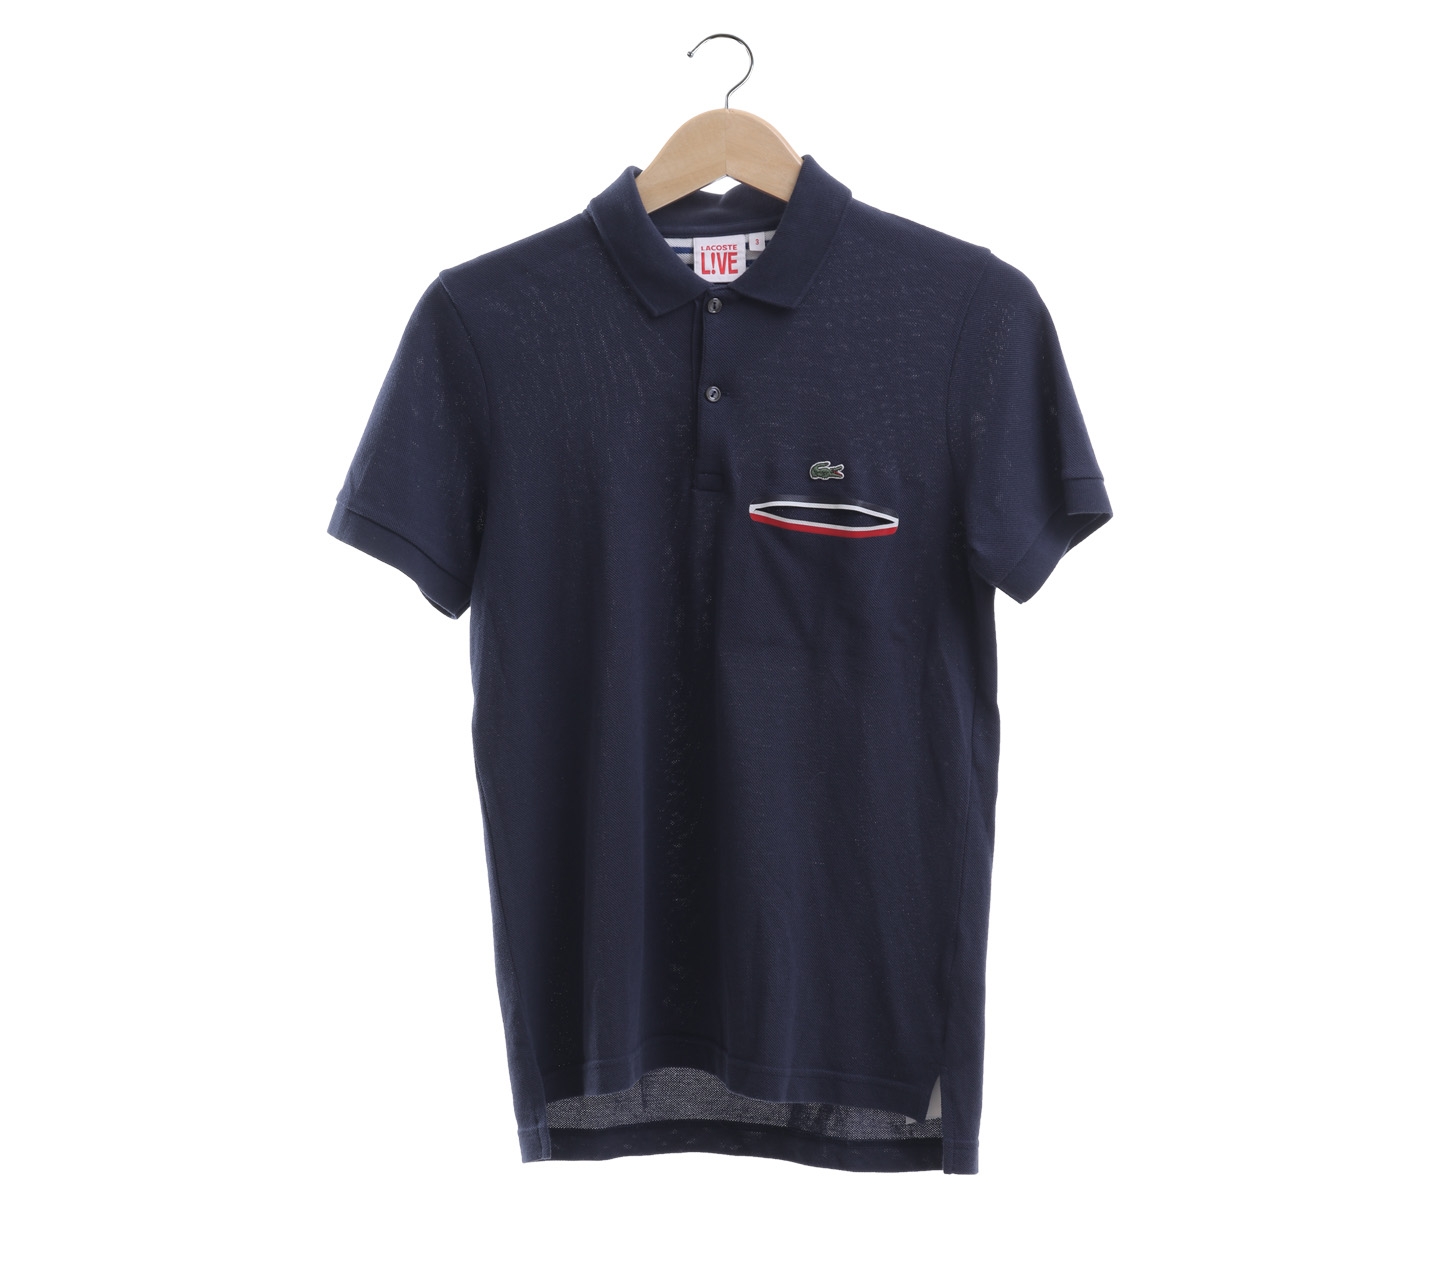 Lacoste Live Navy T-Shirt